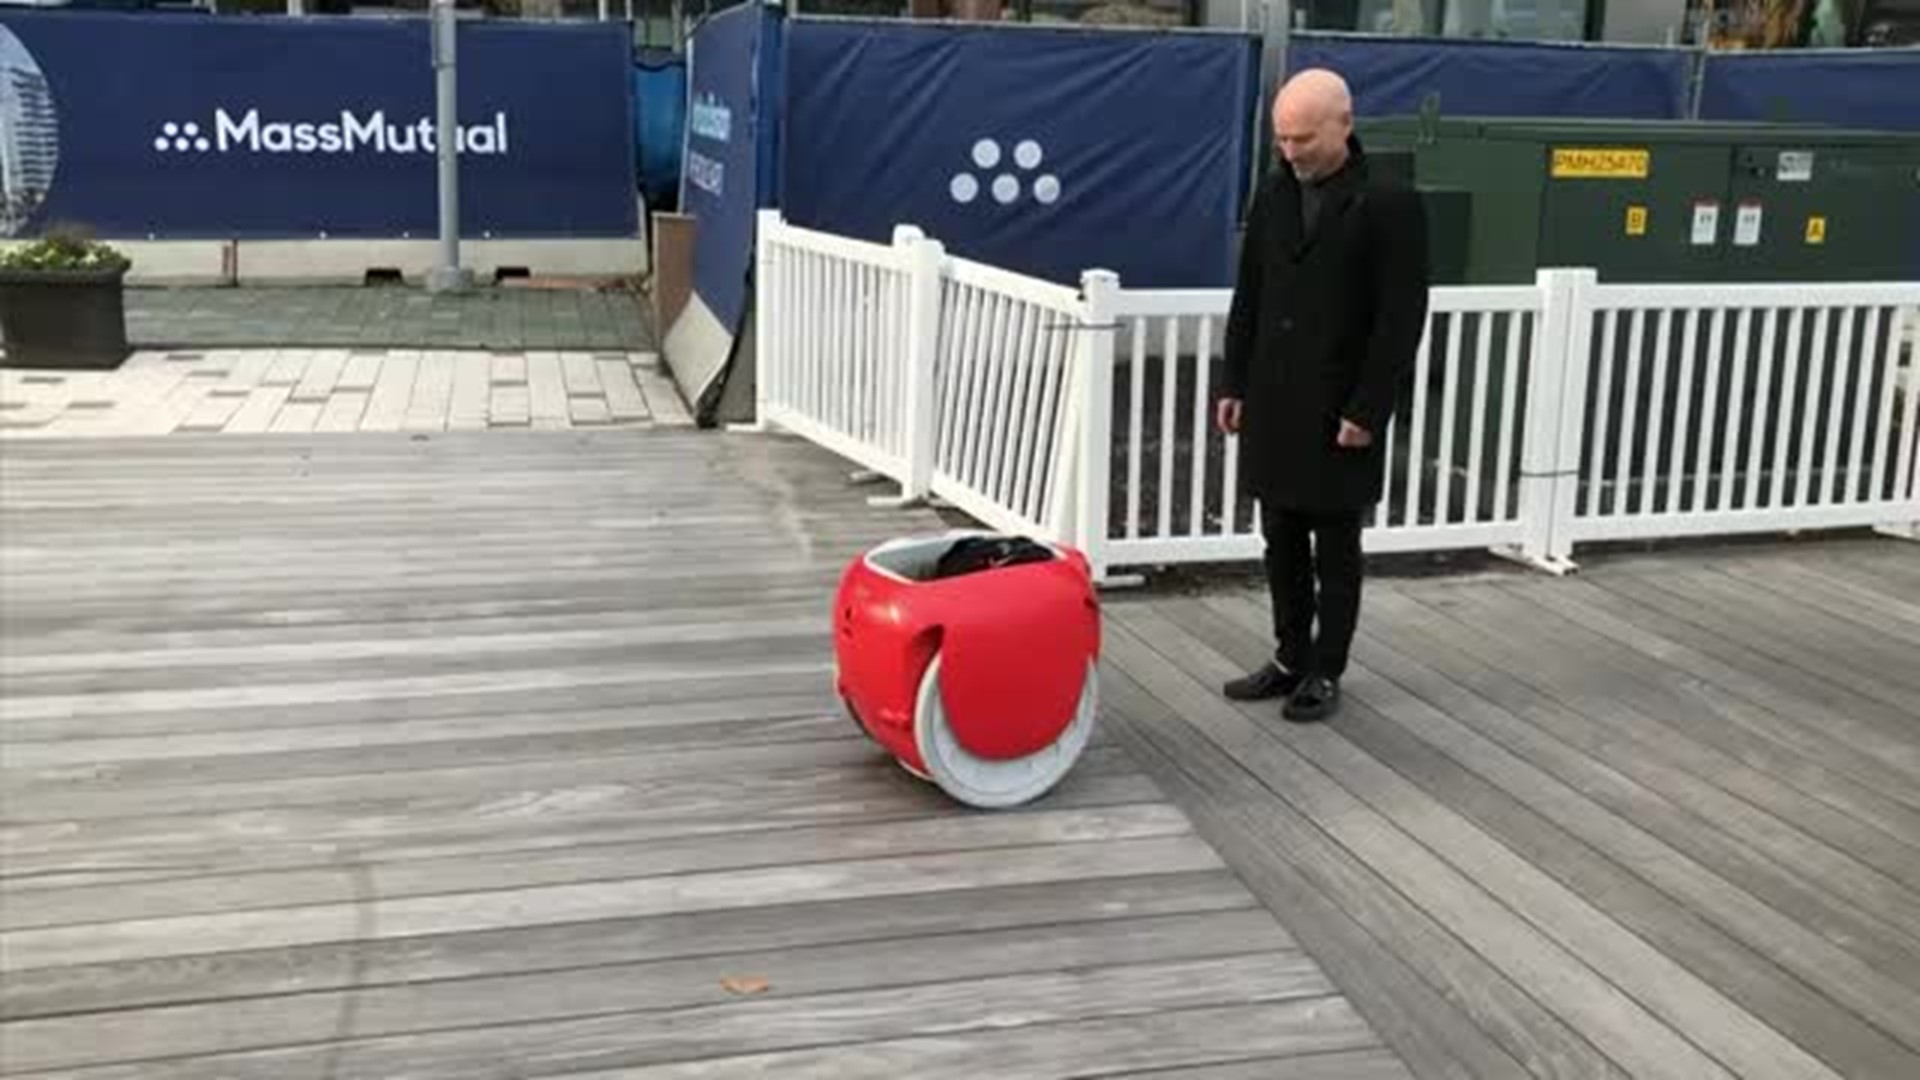 First cargo-carrying robot now available for consumers